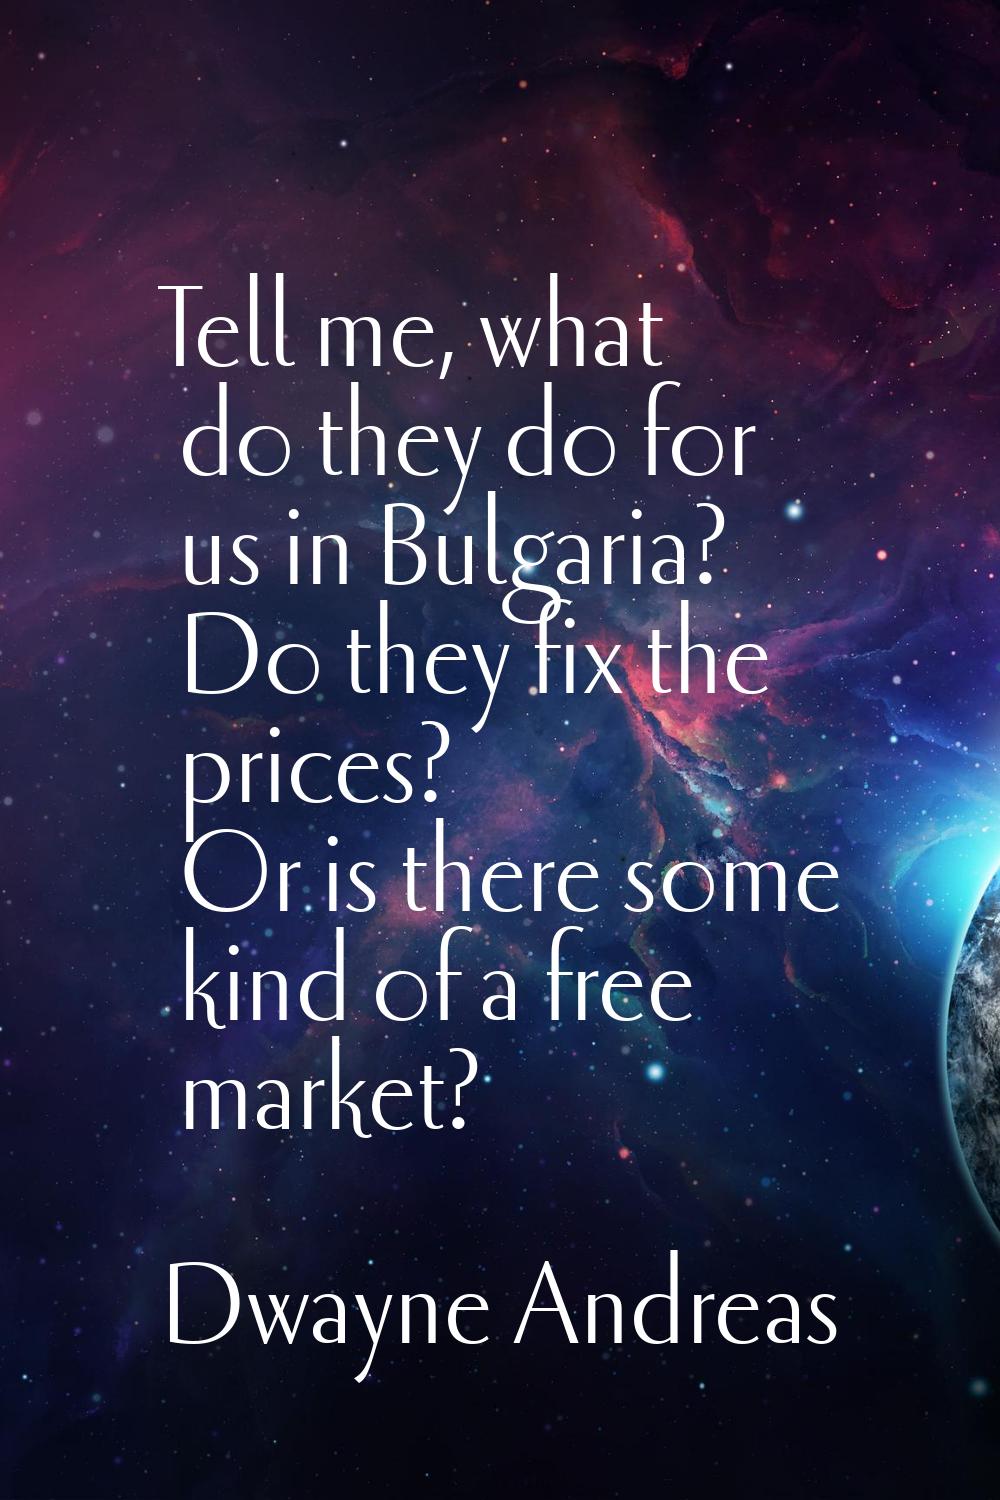 Tell me, what do they do for us in Bulgaria? Do they fix the prices? Or is there some kind of a fre